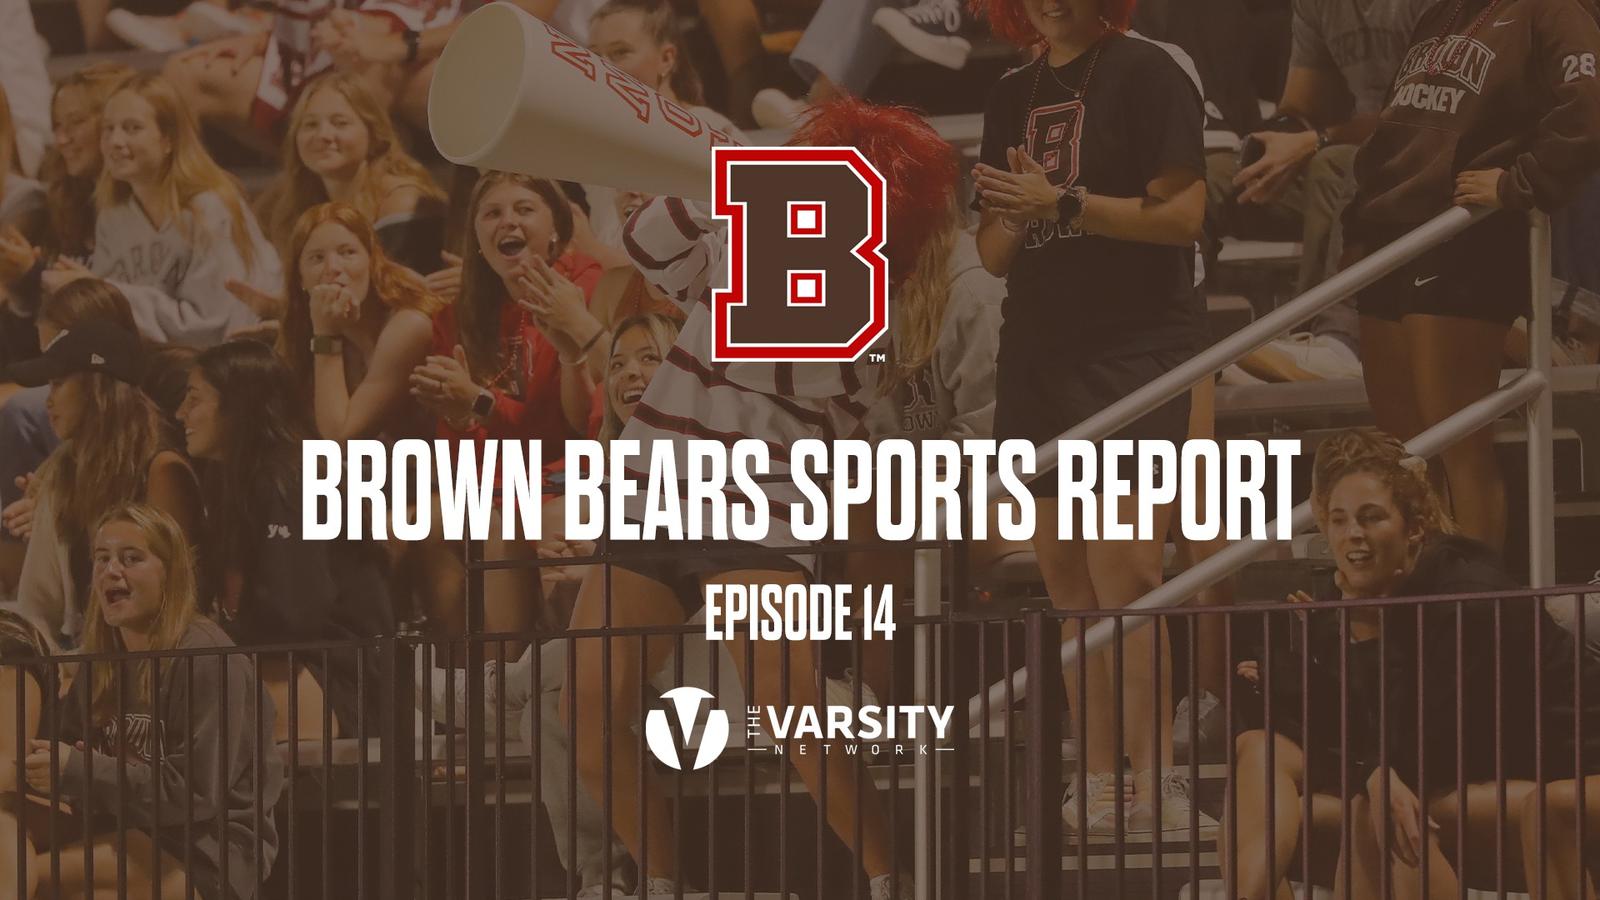 Episode 14 of Brown Bears Sports Report